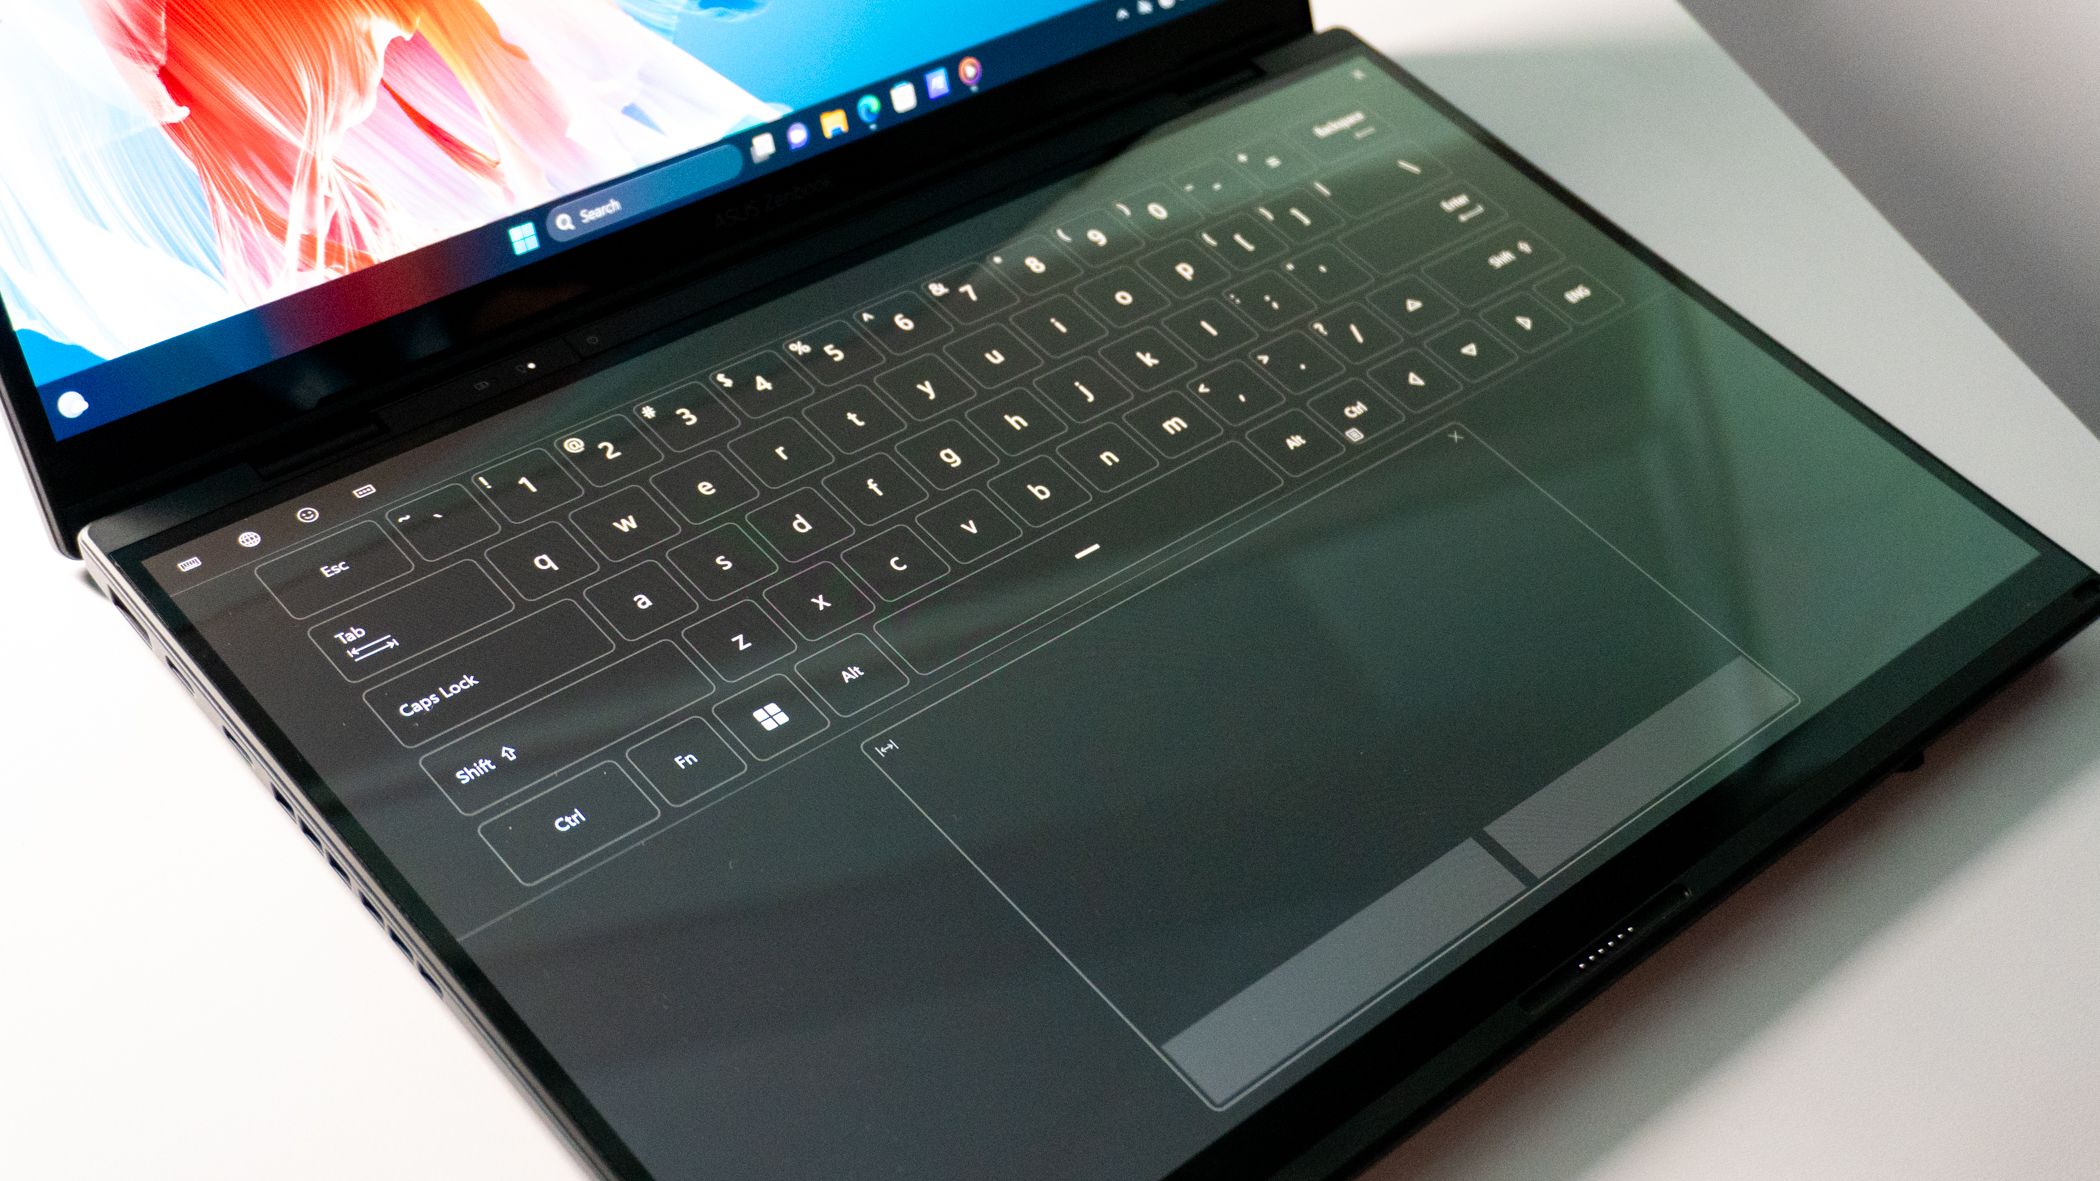 CES 2024: Hands-on with the Asus ZenBook Duo